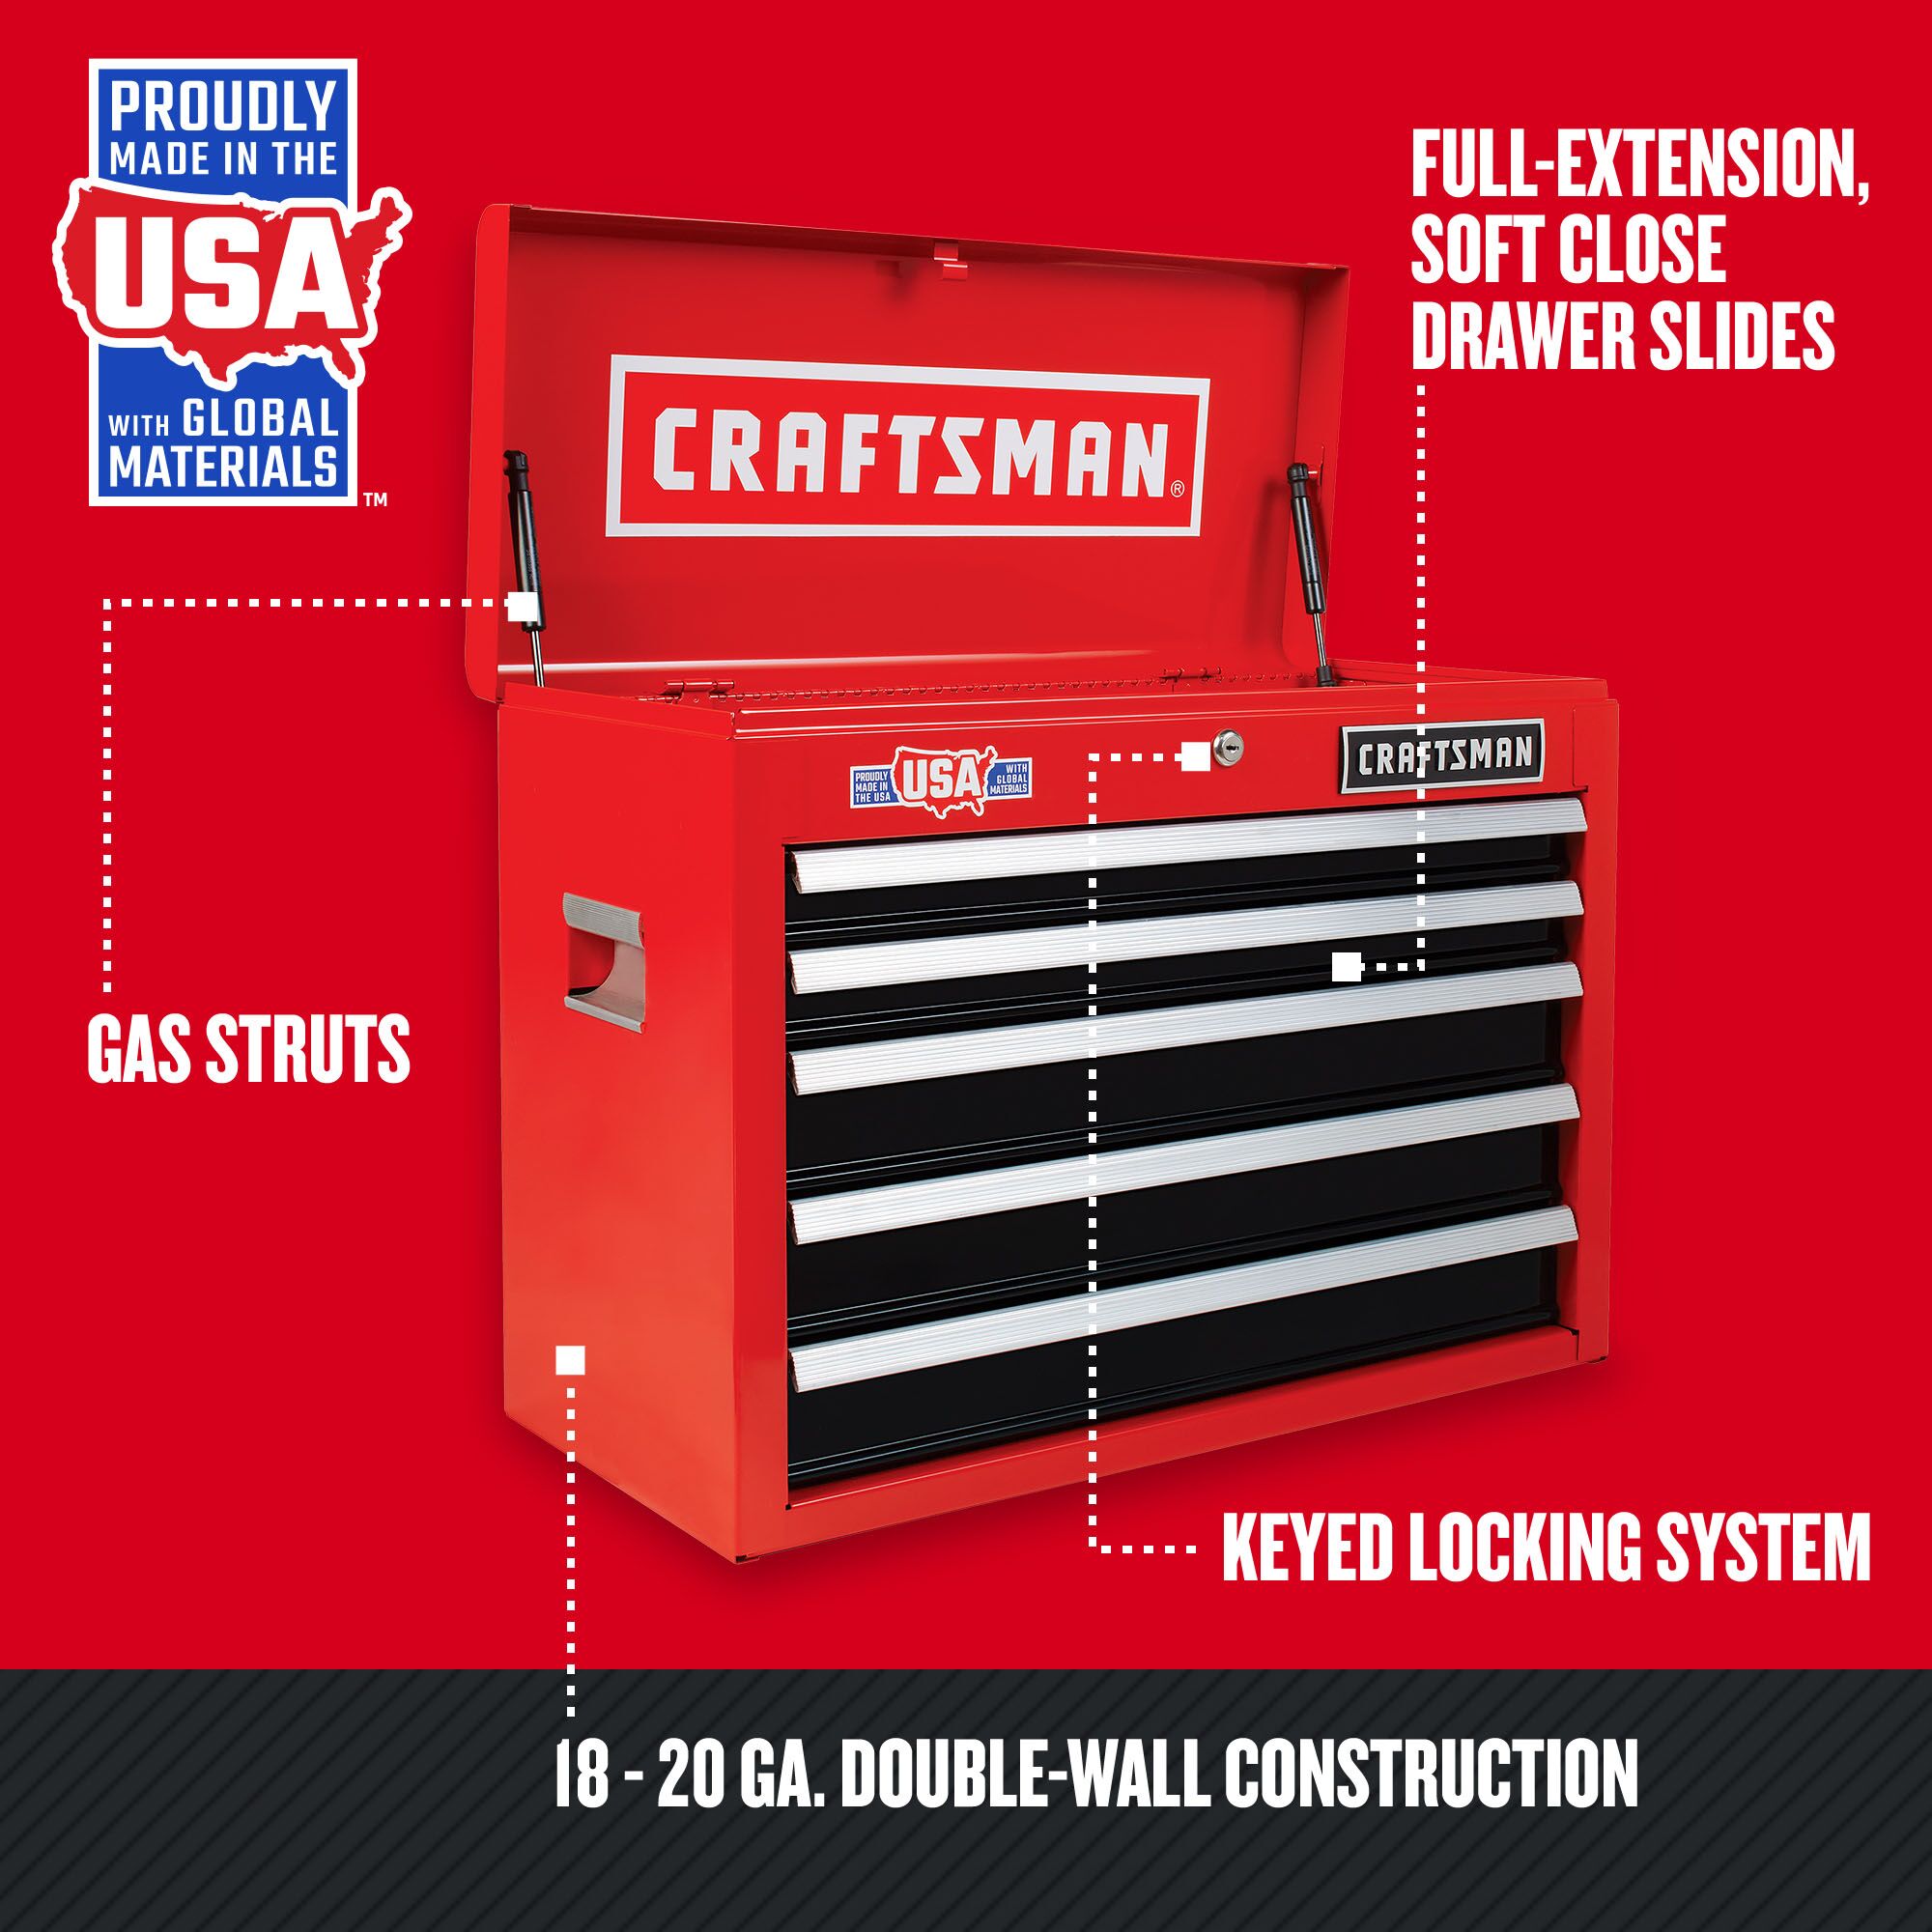 Graphic of CRAFTSMAN Storage: Cabinets & Chests Rolling highlighting product features